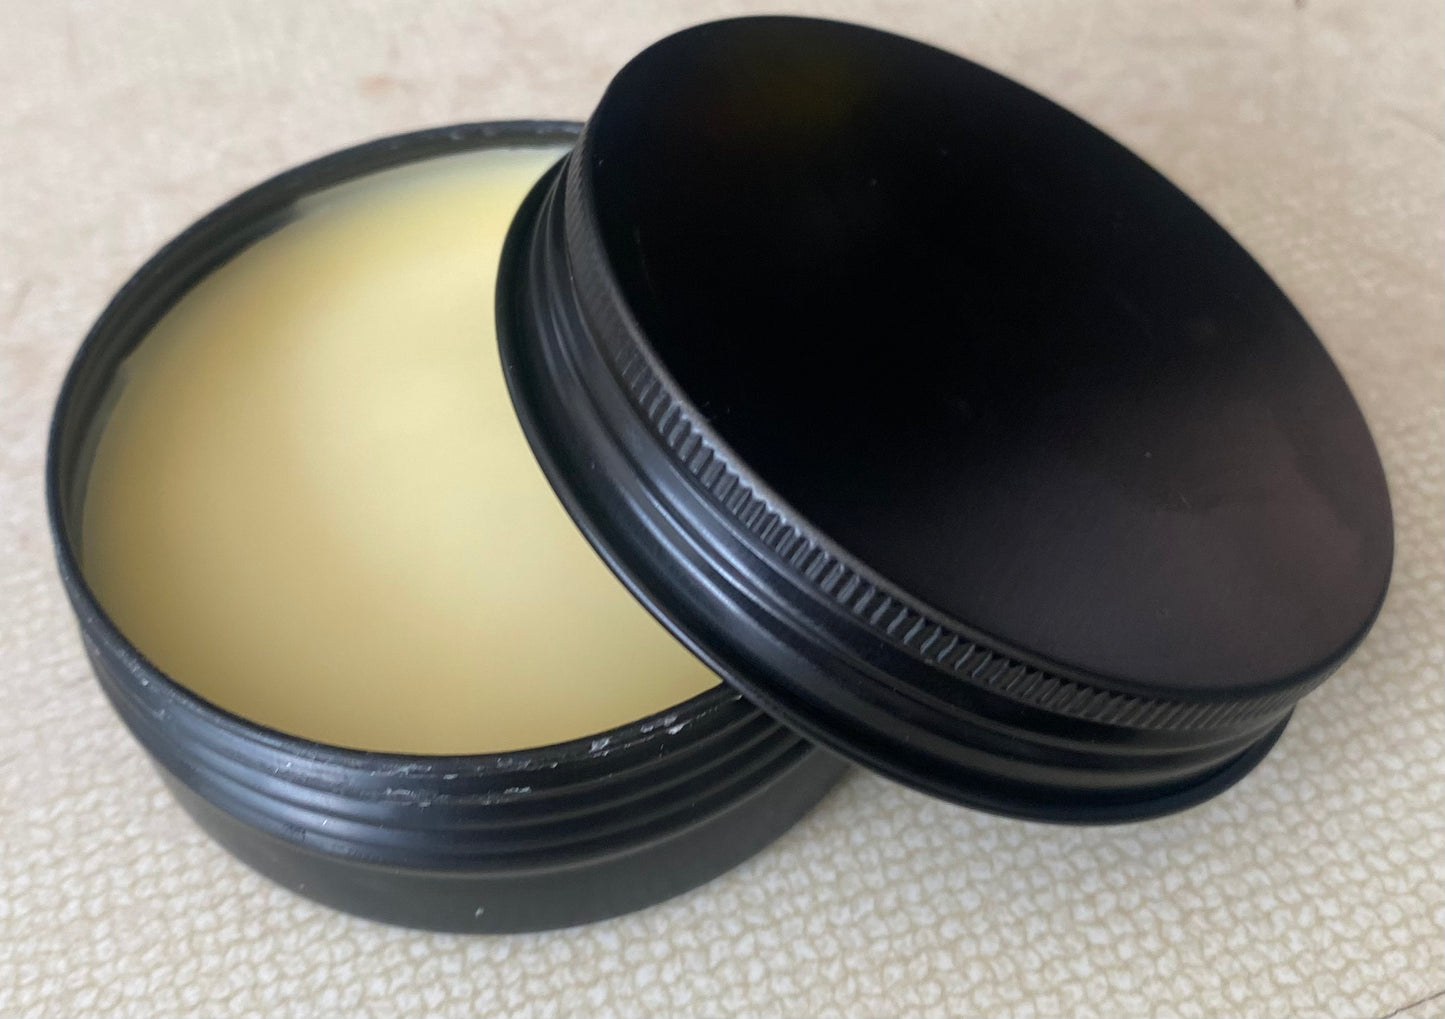 Stem’s Pomade Hairstyling Grease